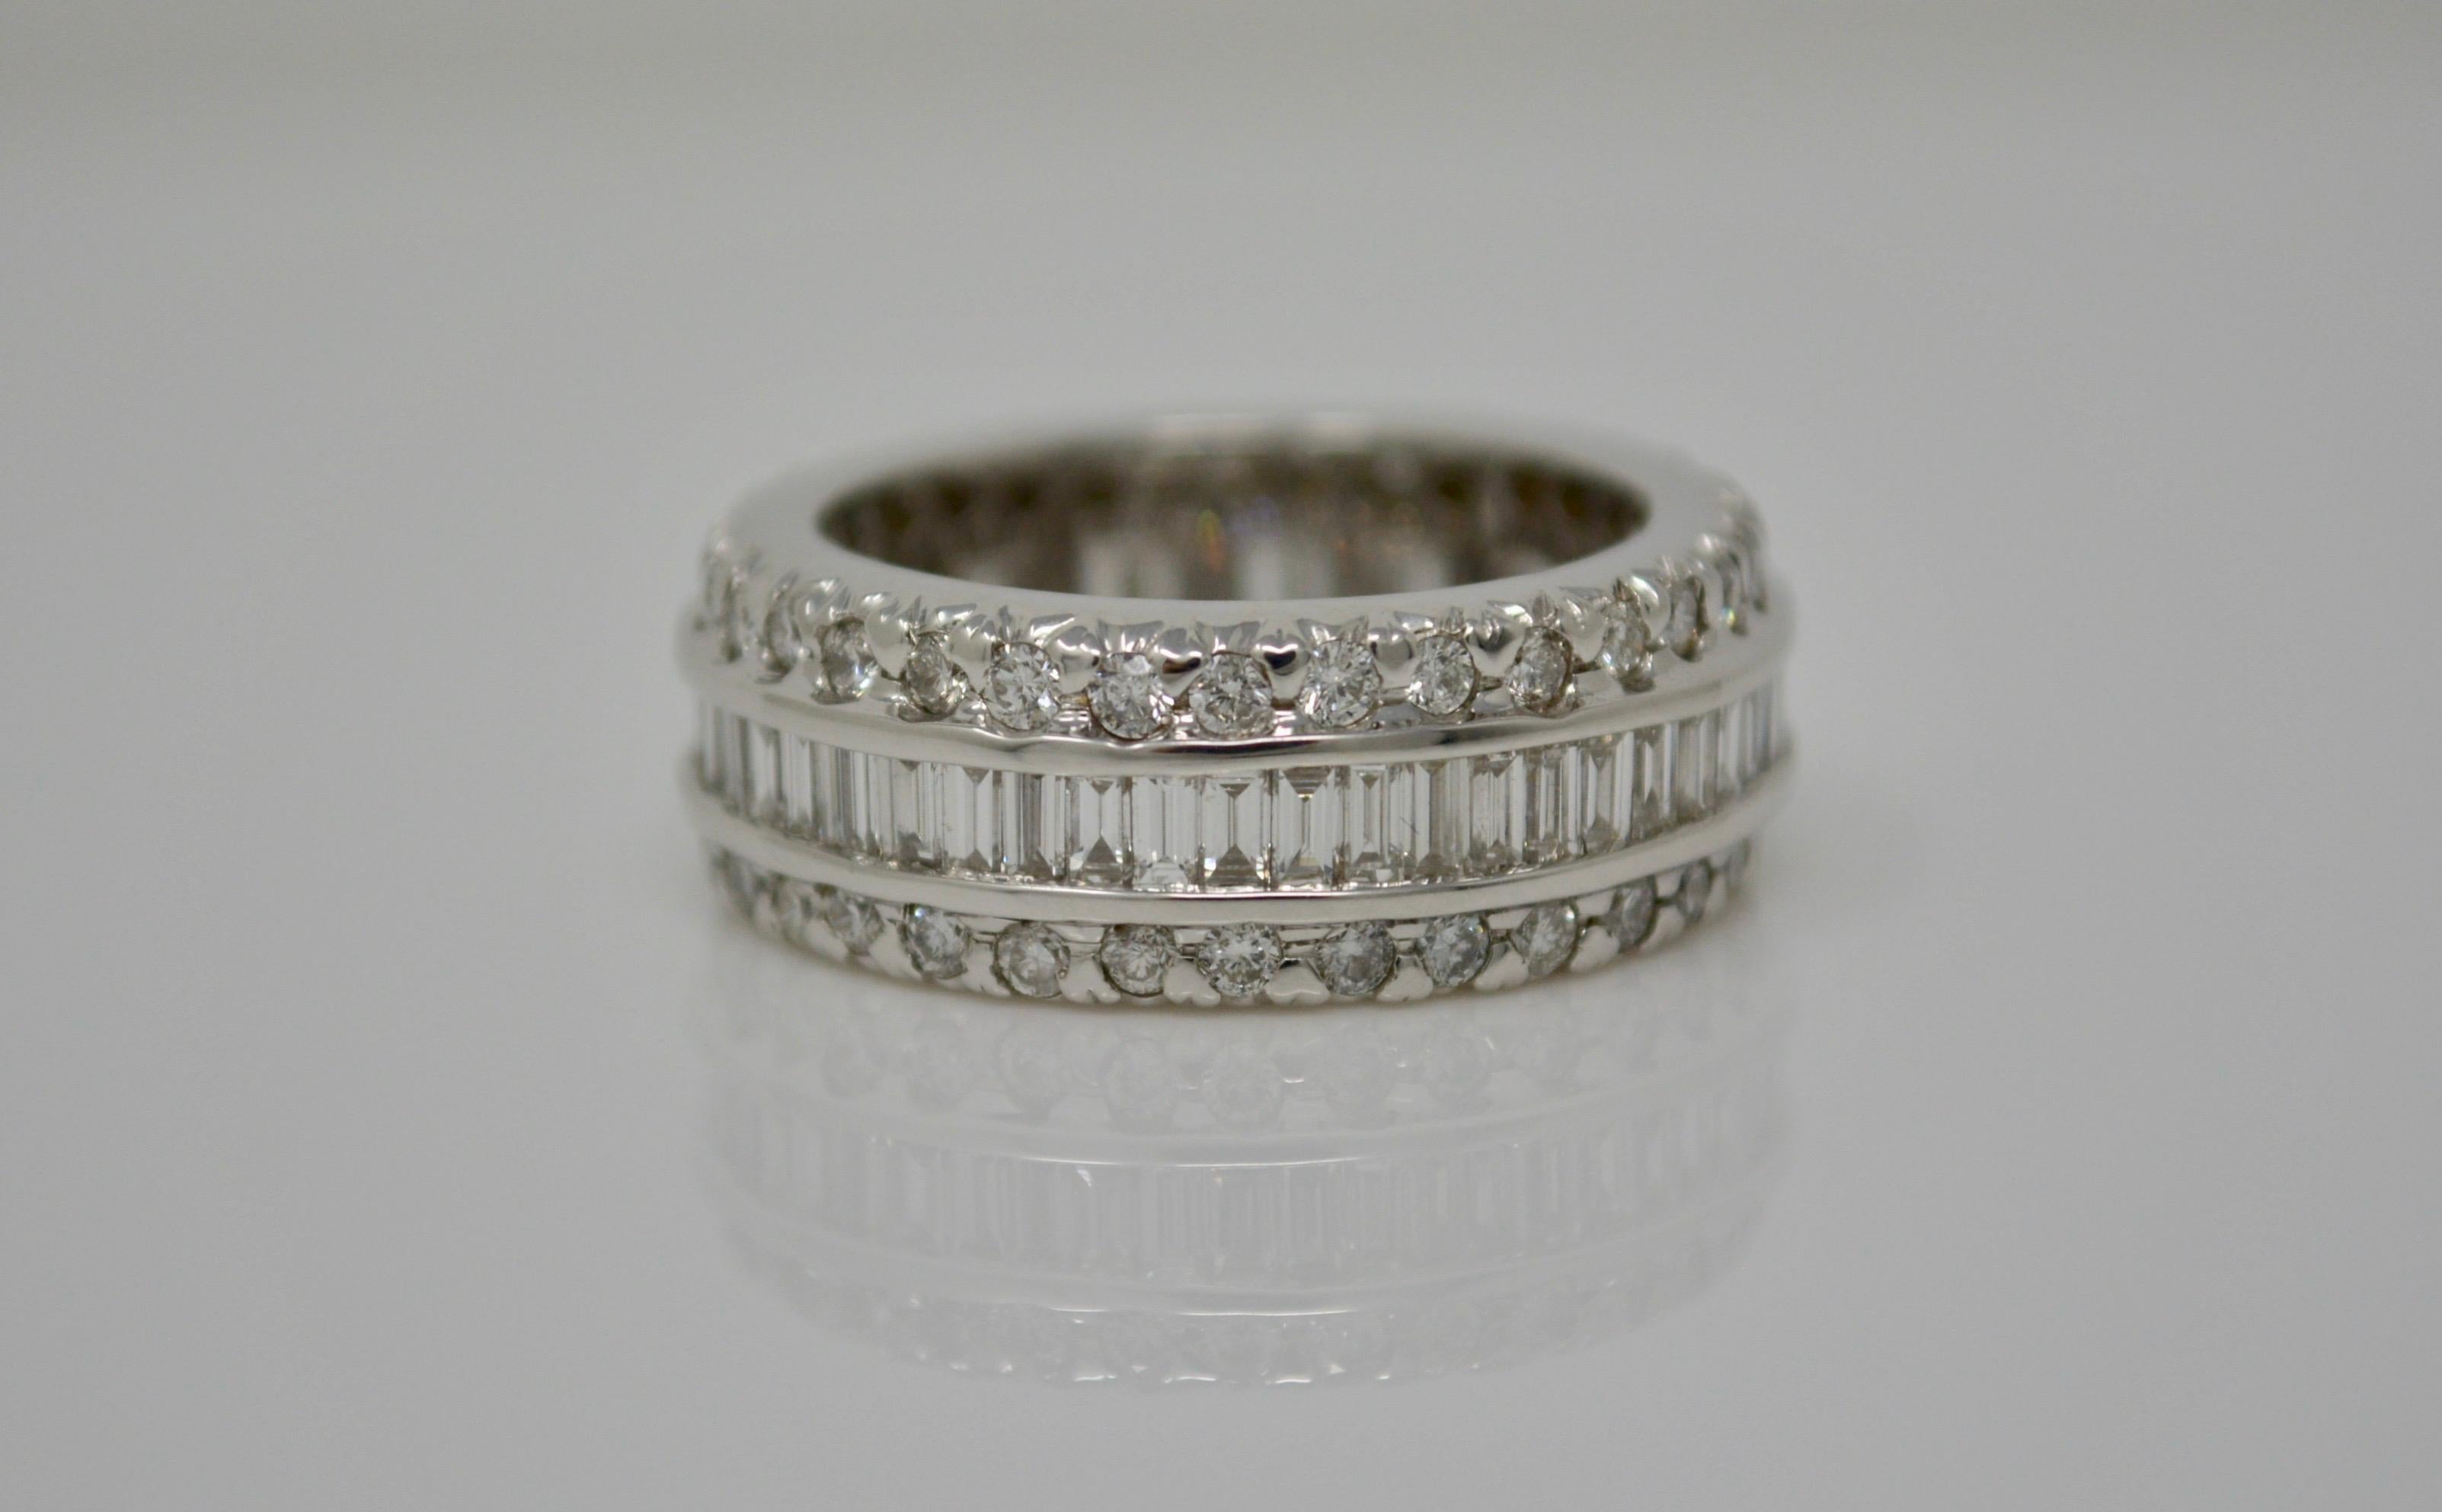 Exquisite wedding Eternity band hand crafted in 18k white gold features a total of 3.30 carat white round brilliant and baguettes with G-H color and VS clarity. The ring size is 7. 